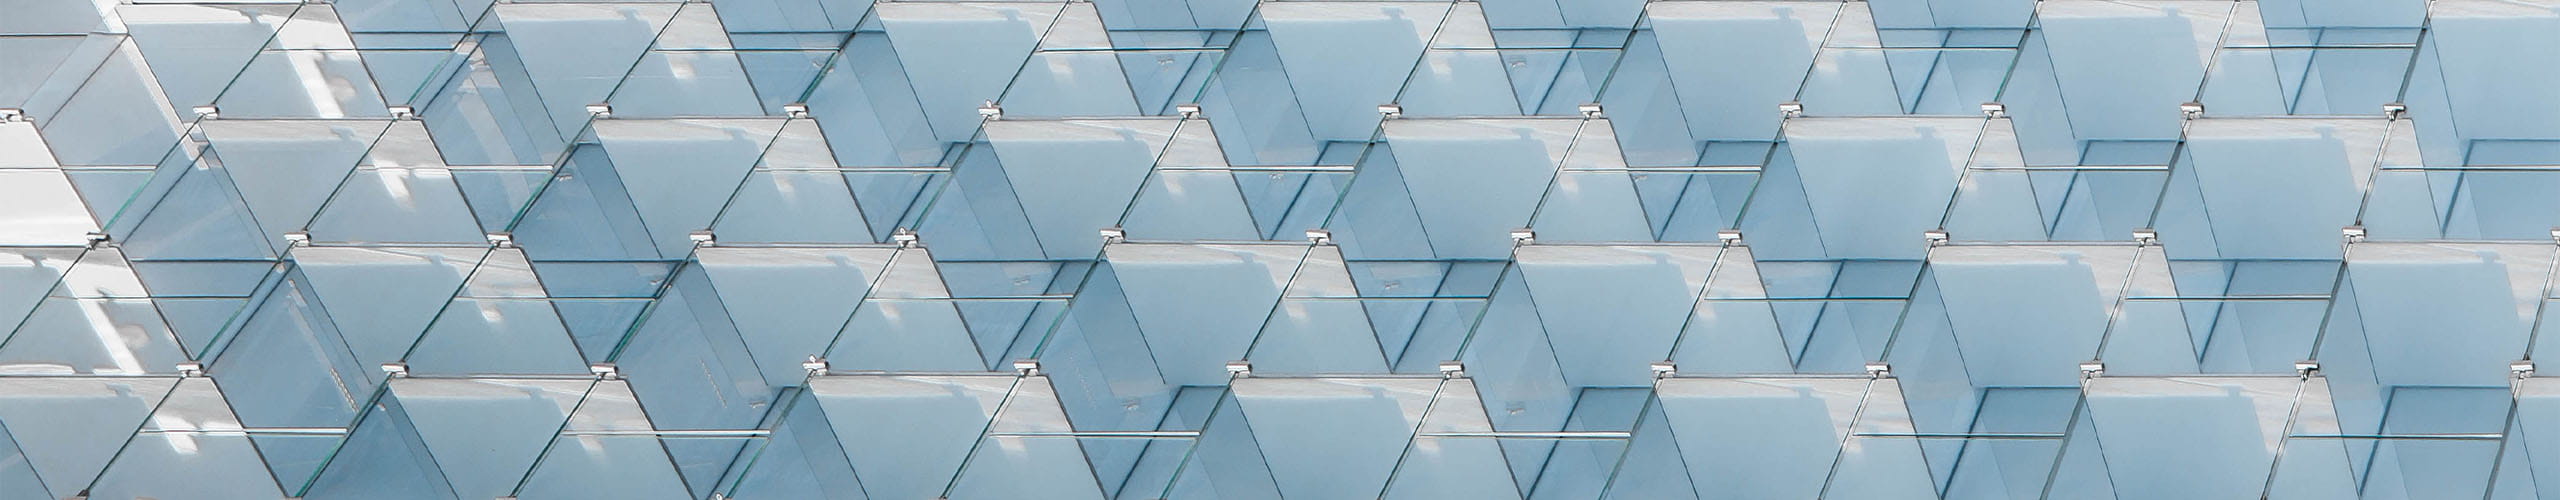 A picture of diamond shaped windows